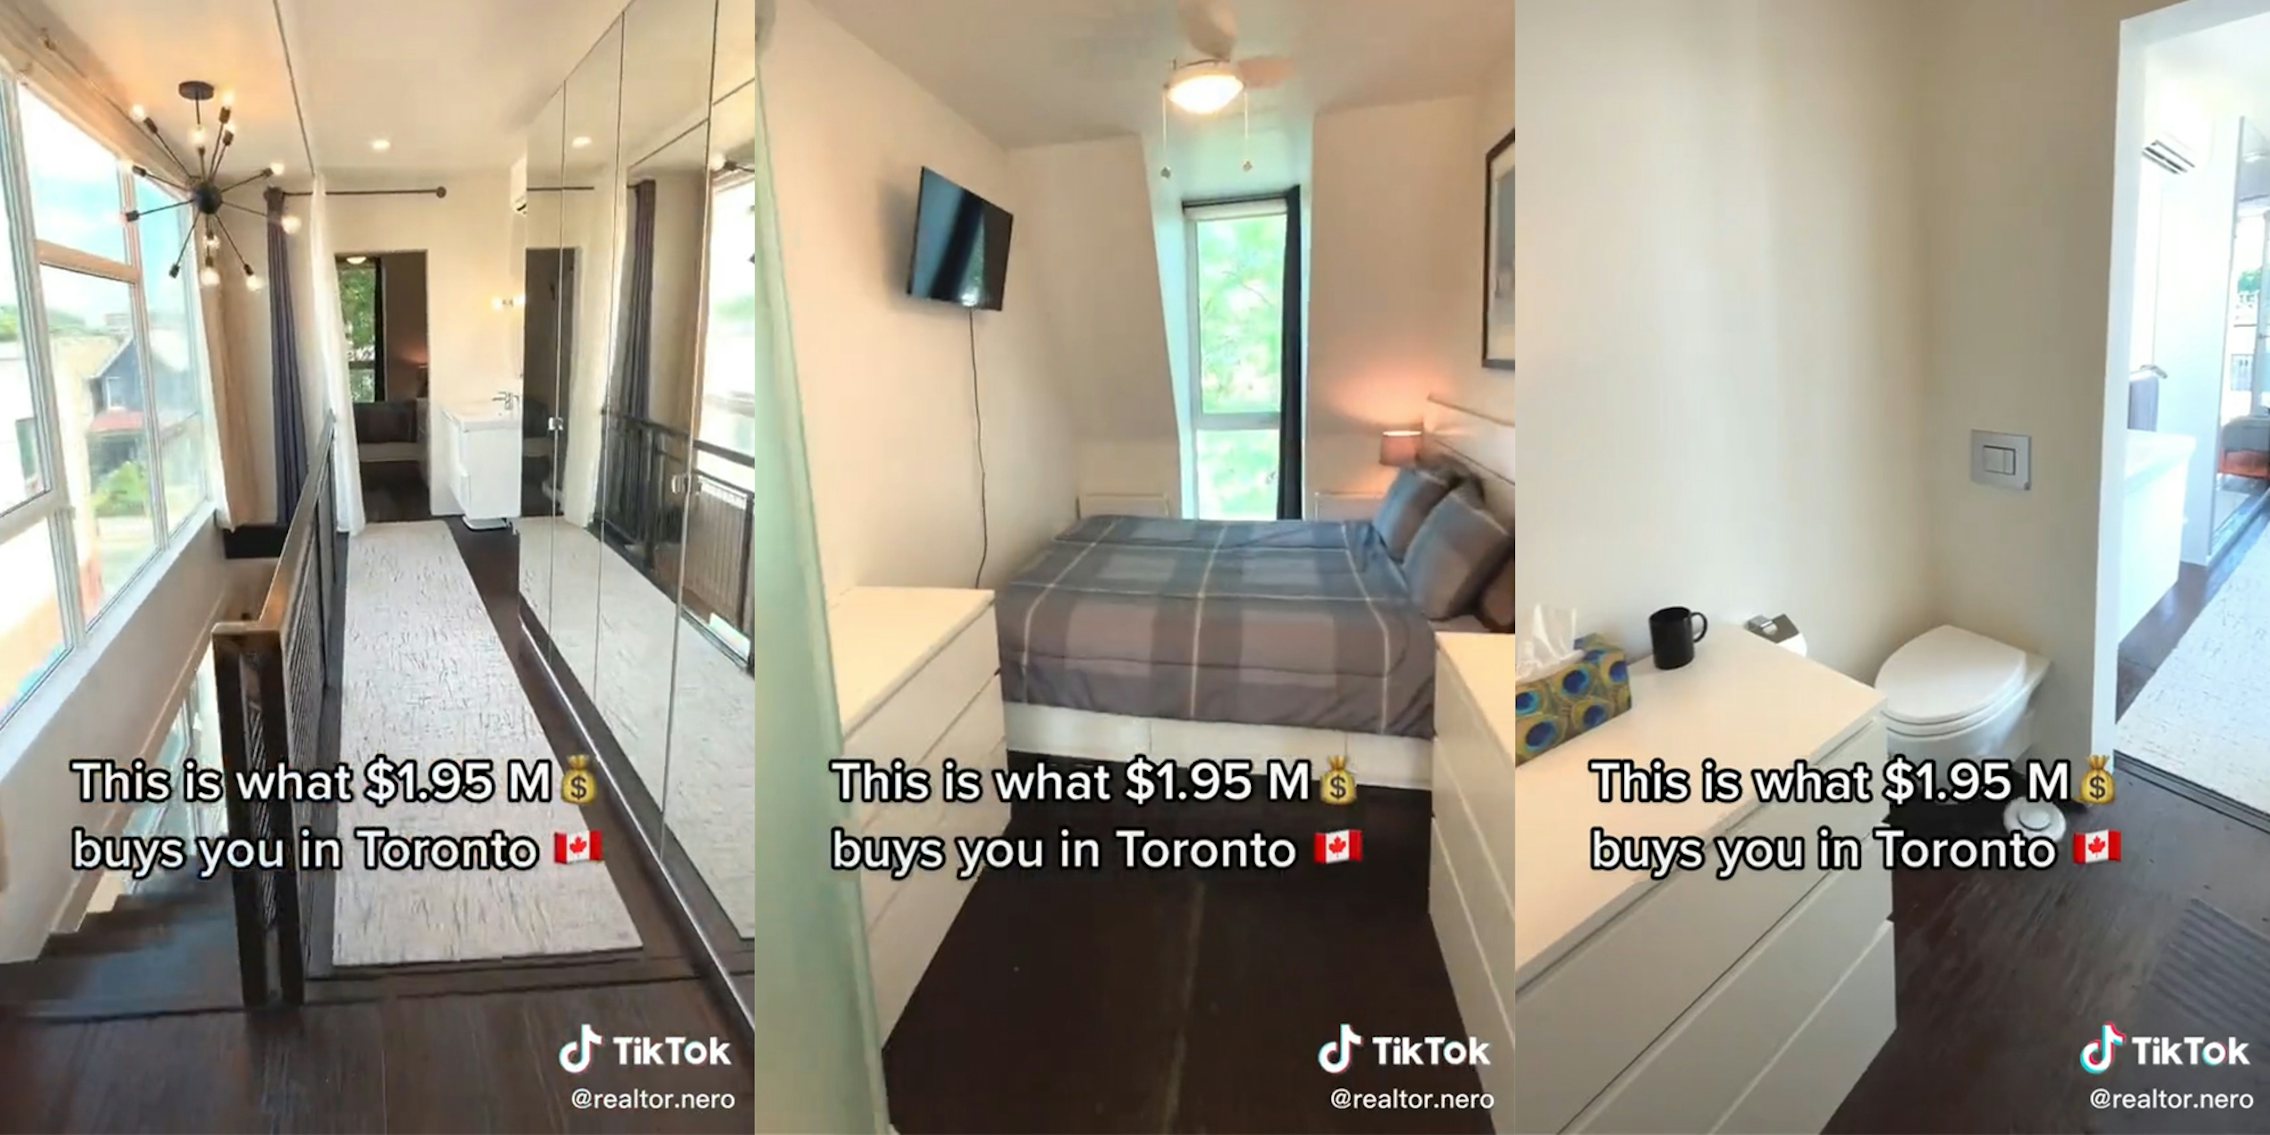 small apartment with toilet in bedroom and caption 'This is what $1.95 M buys you in Toronto'